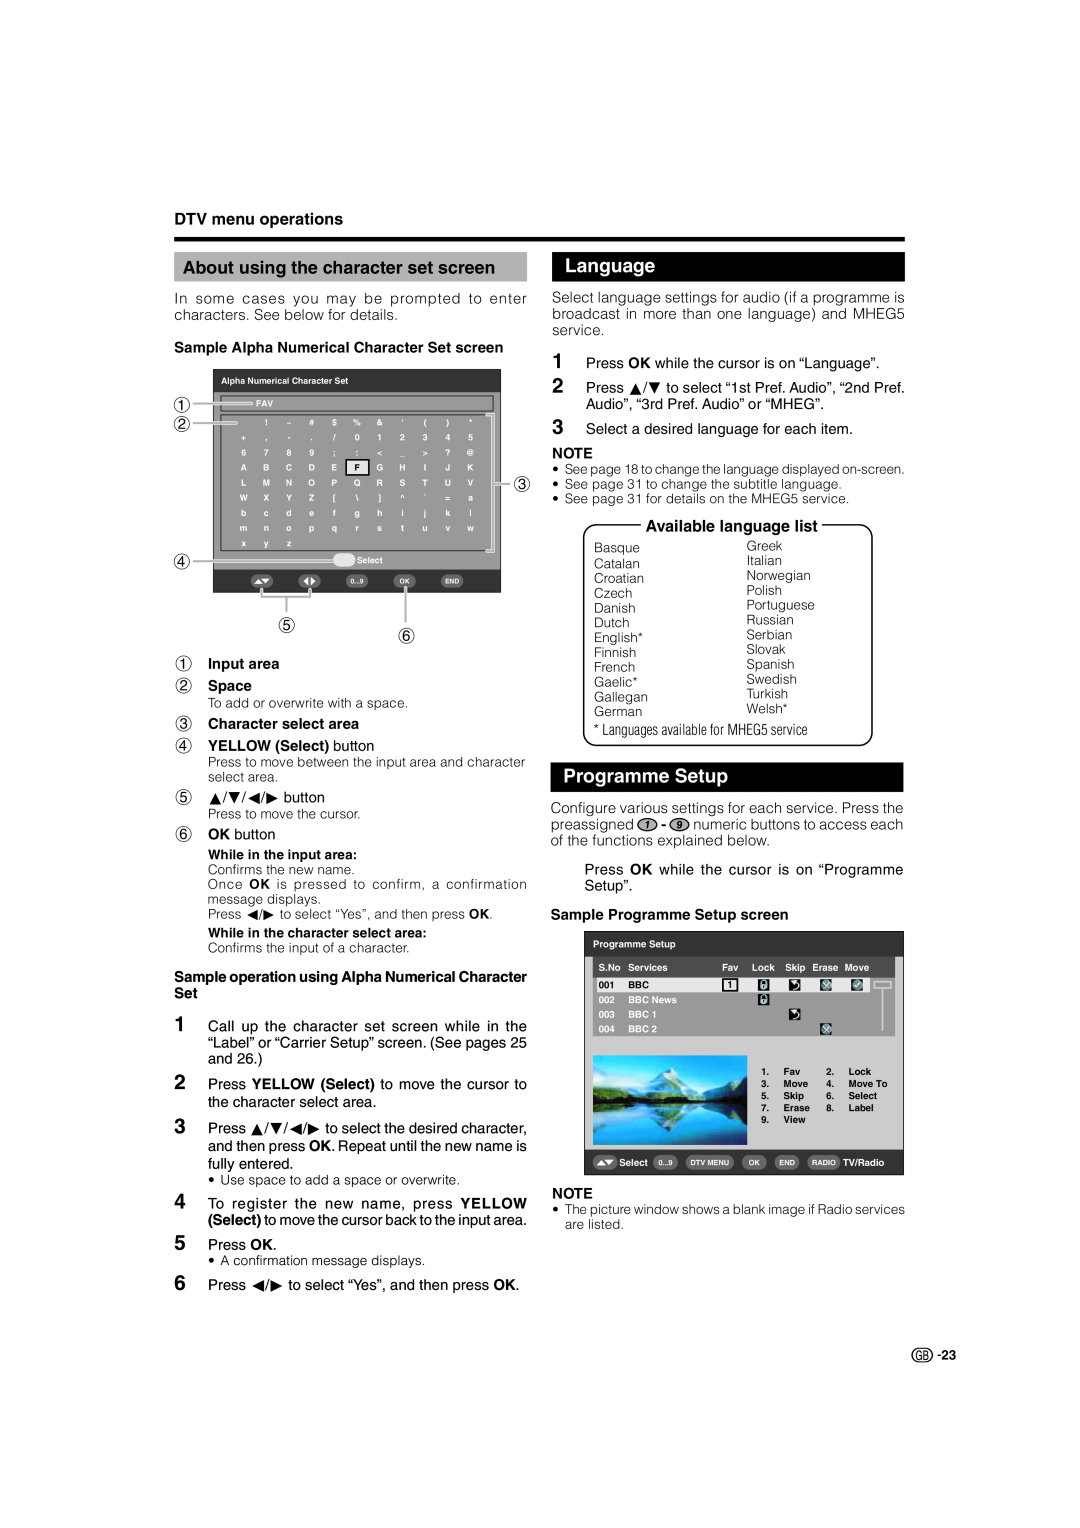 Sharp LC-42AD5S Language, Programme Setup, About using the character set screen, DTV menu operations, Input area 2 Space 